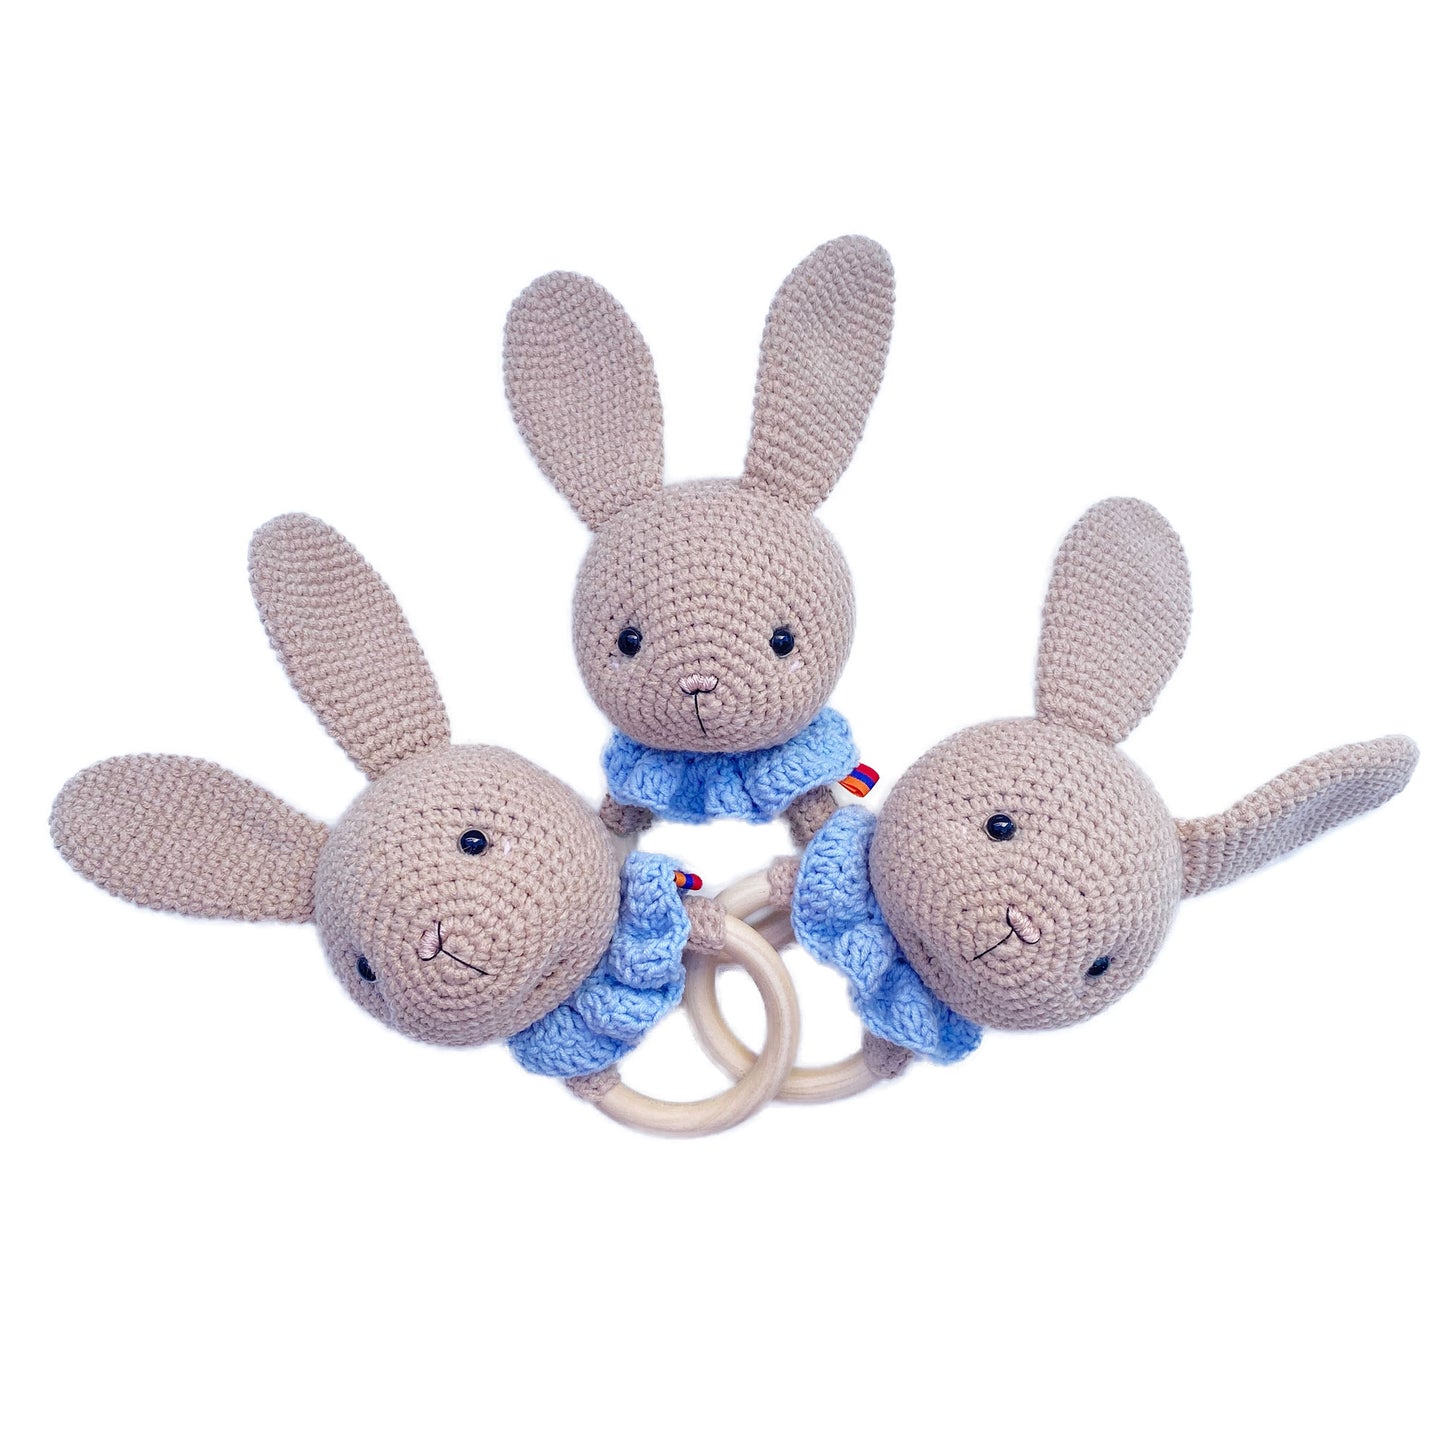 Blue Lulibear Bunny Rattles nursery first toy/ Newborn baby rattle toy/Neutral bunny teether/ Expecting mom gift